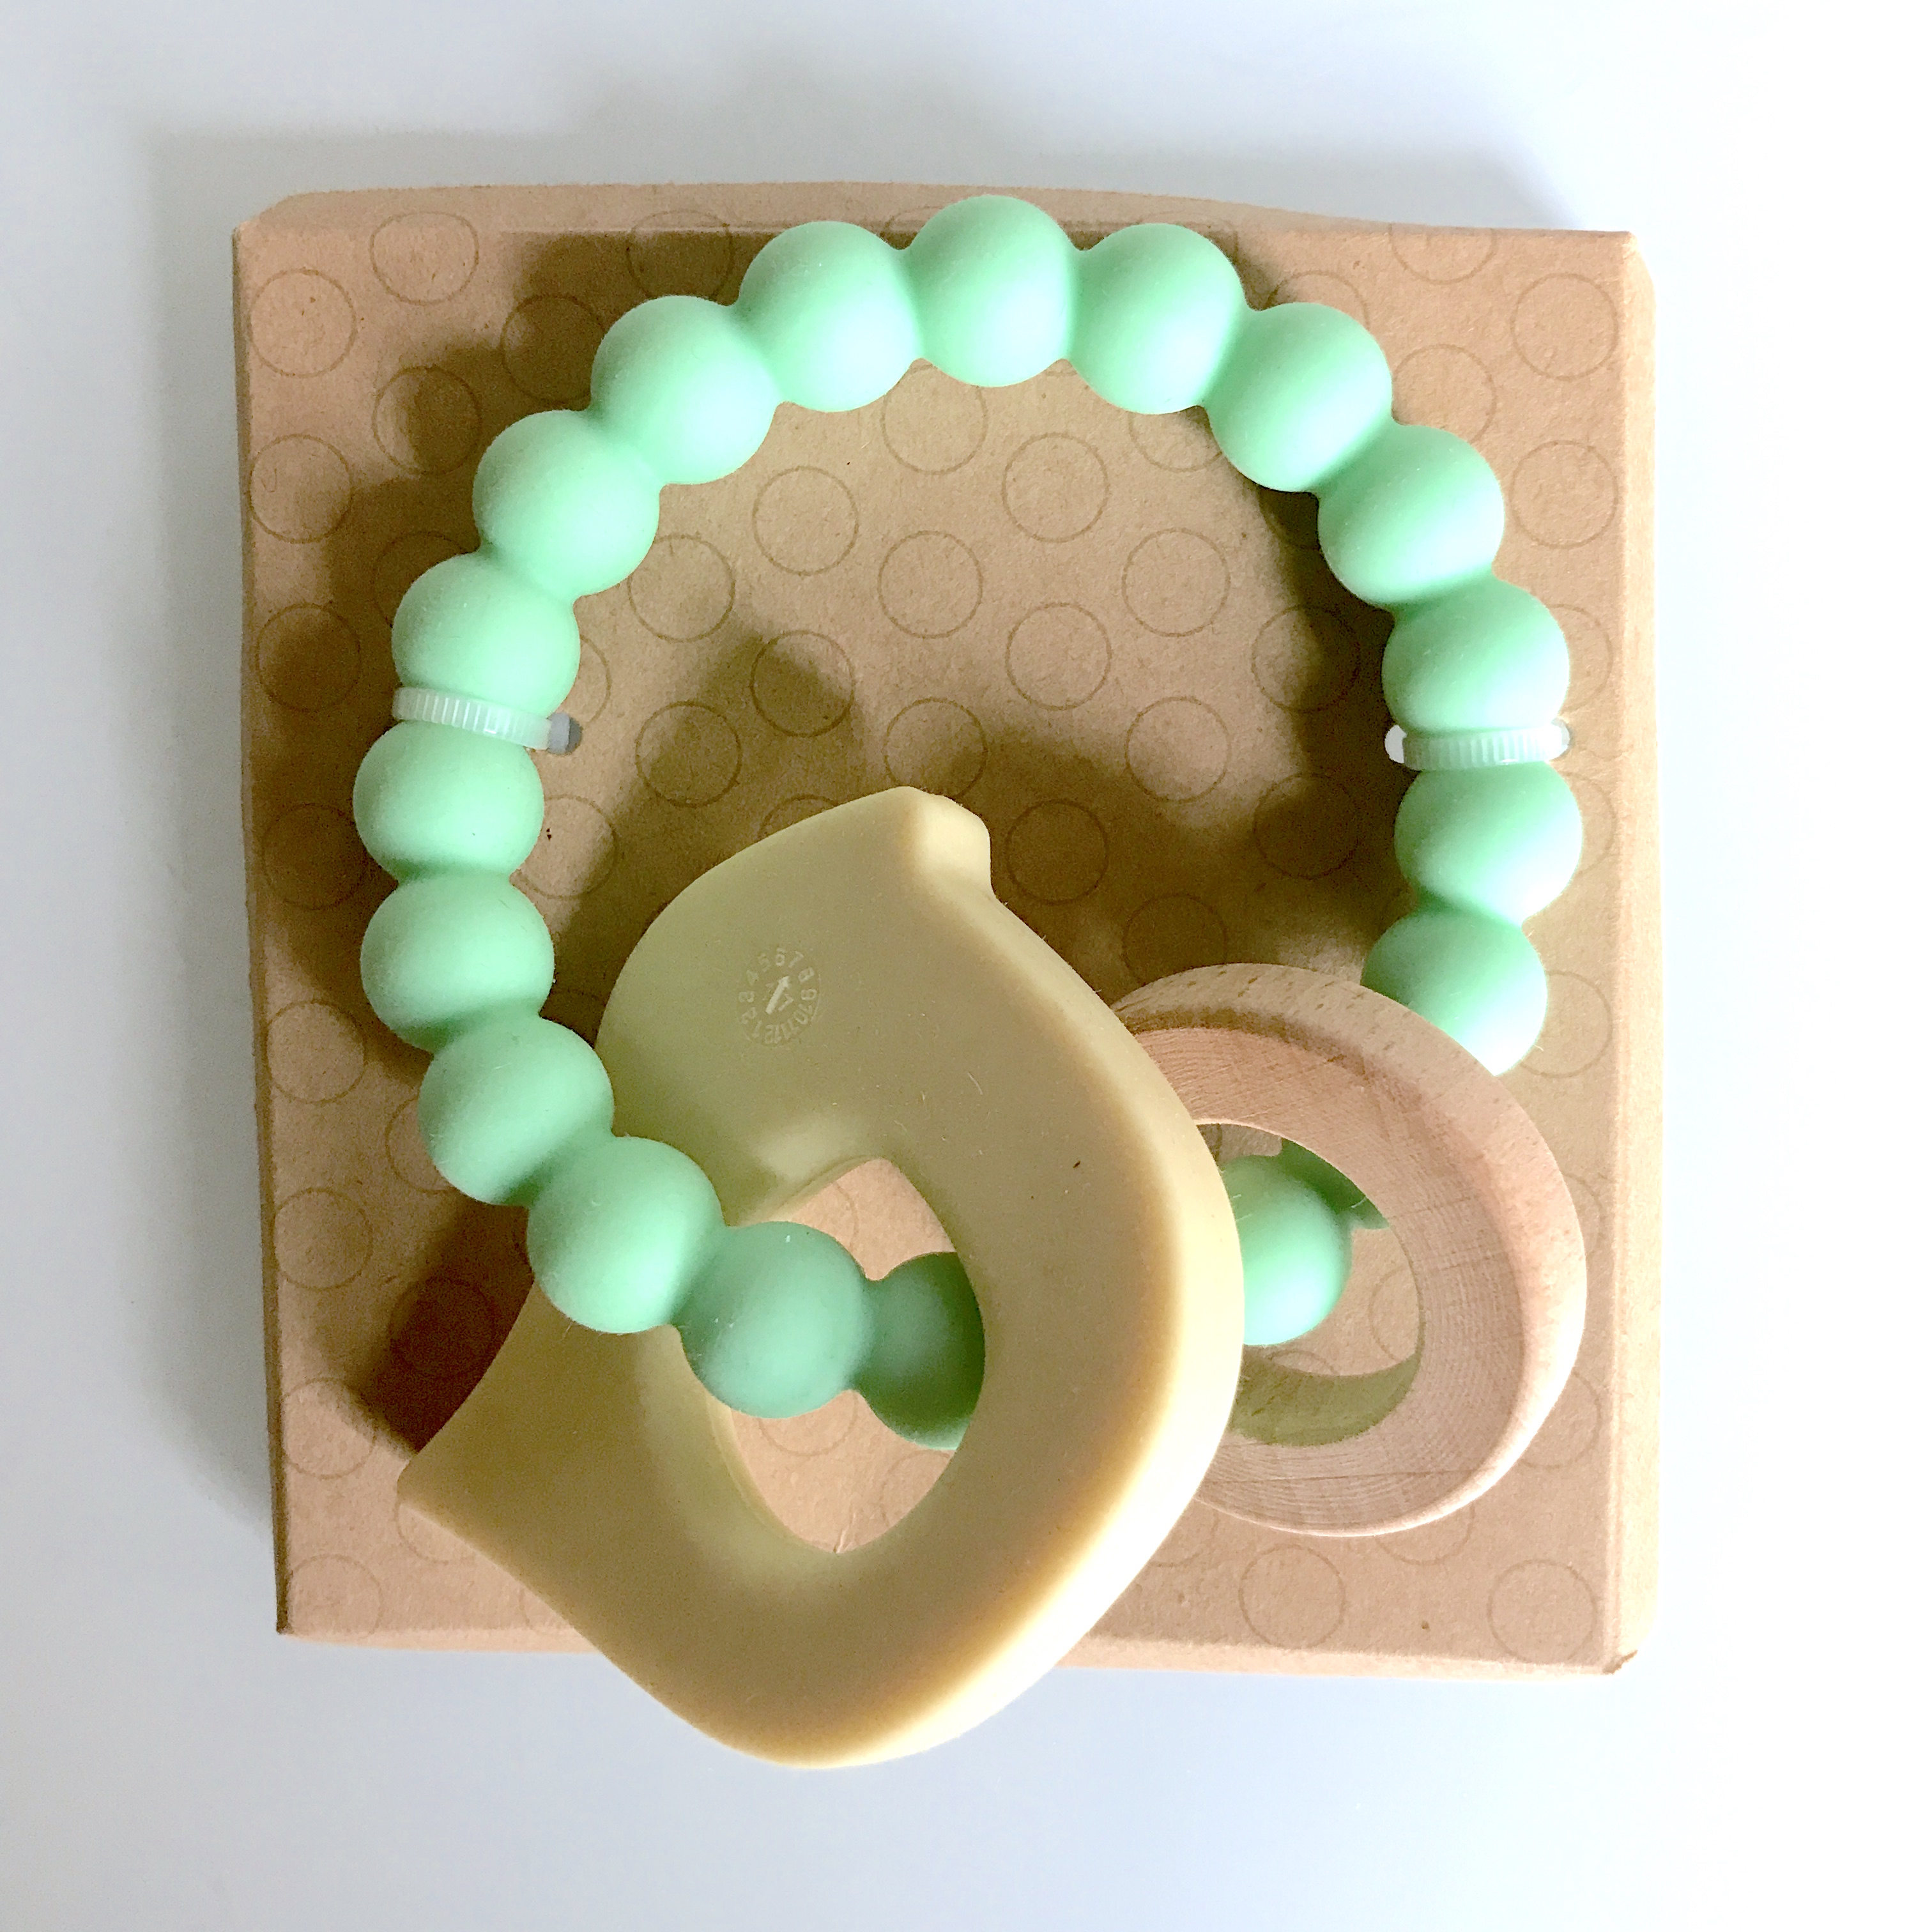 Healthiest Baby 21 Bundles February 2018 - silicone teether